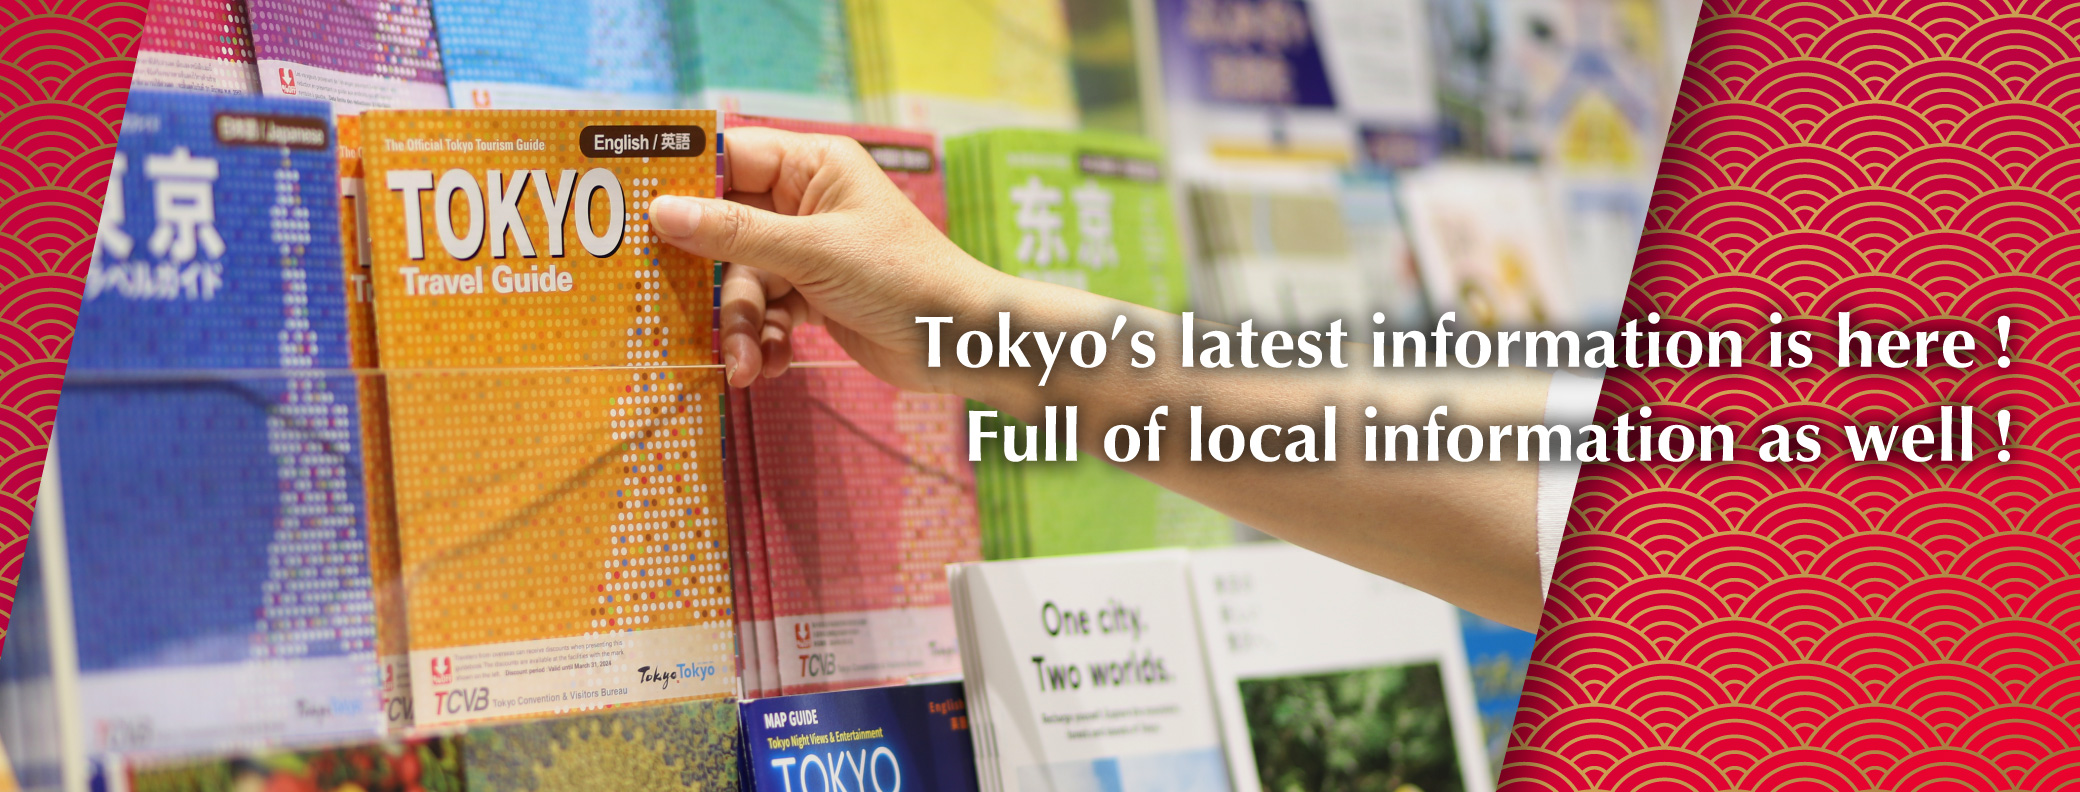 Tokyo's latest information is here! Full of local information as well!